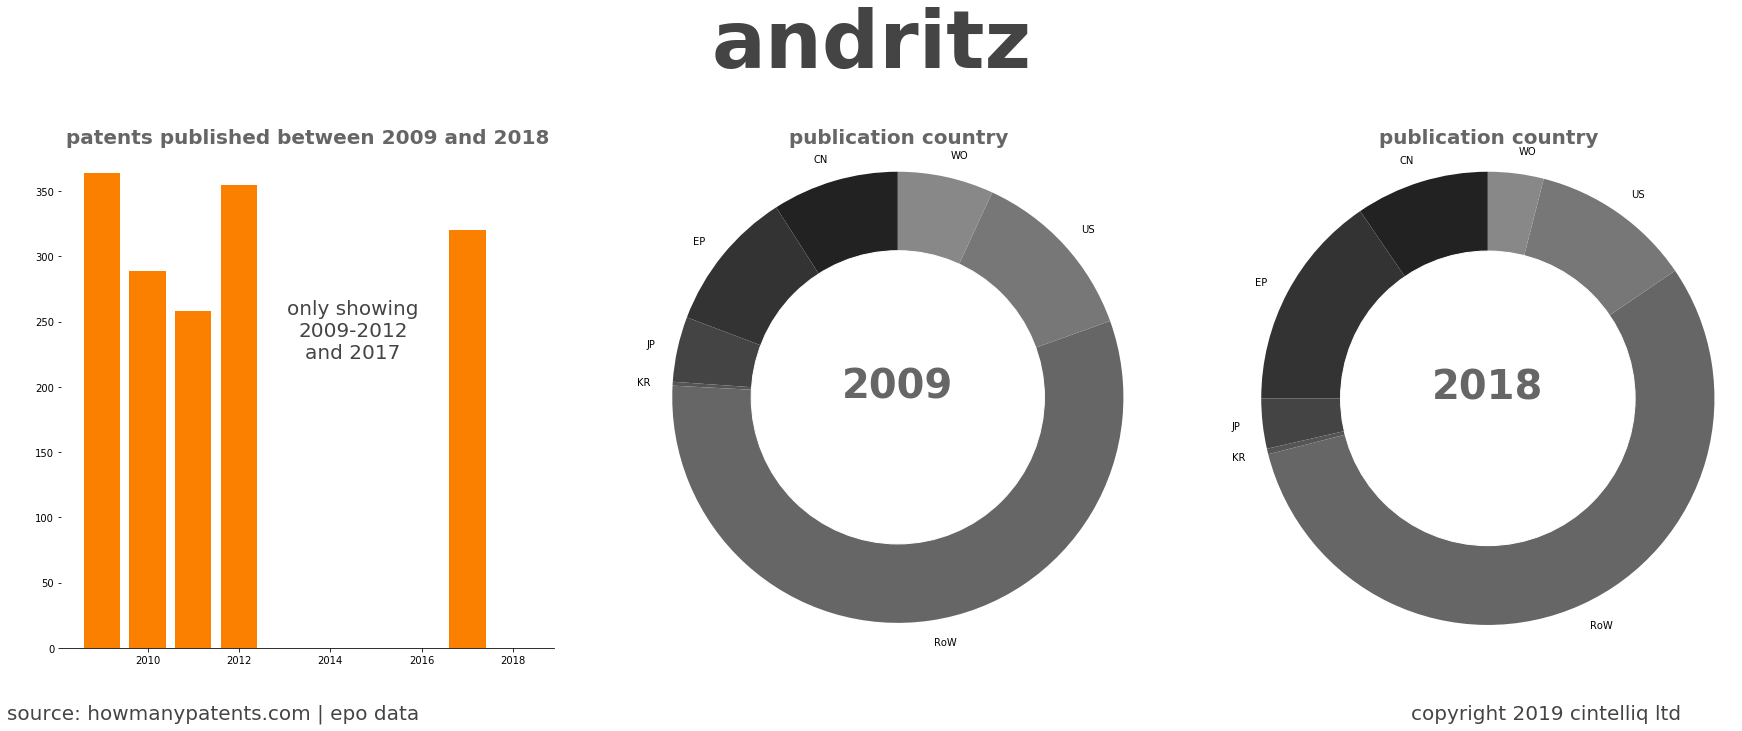 summary of patents for Andritz